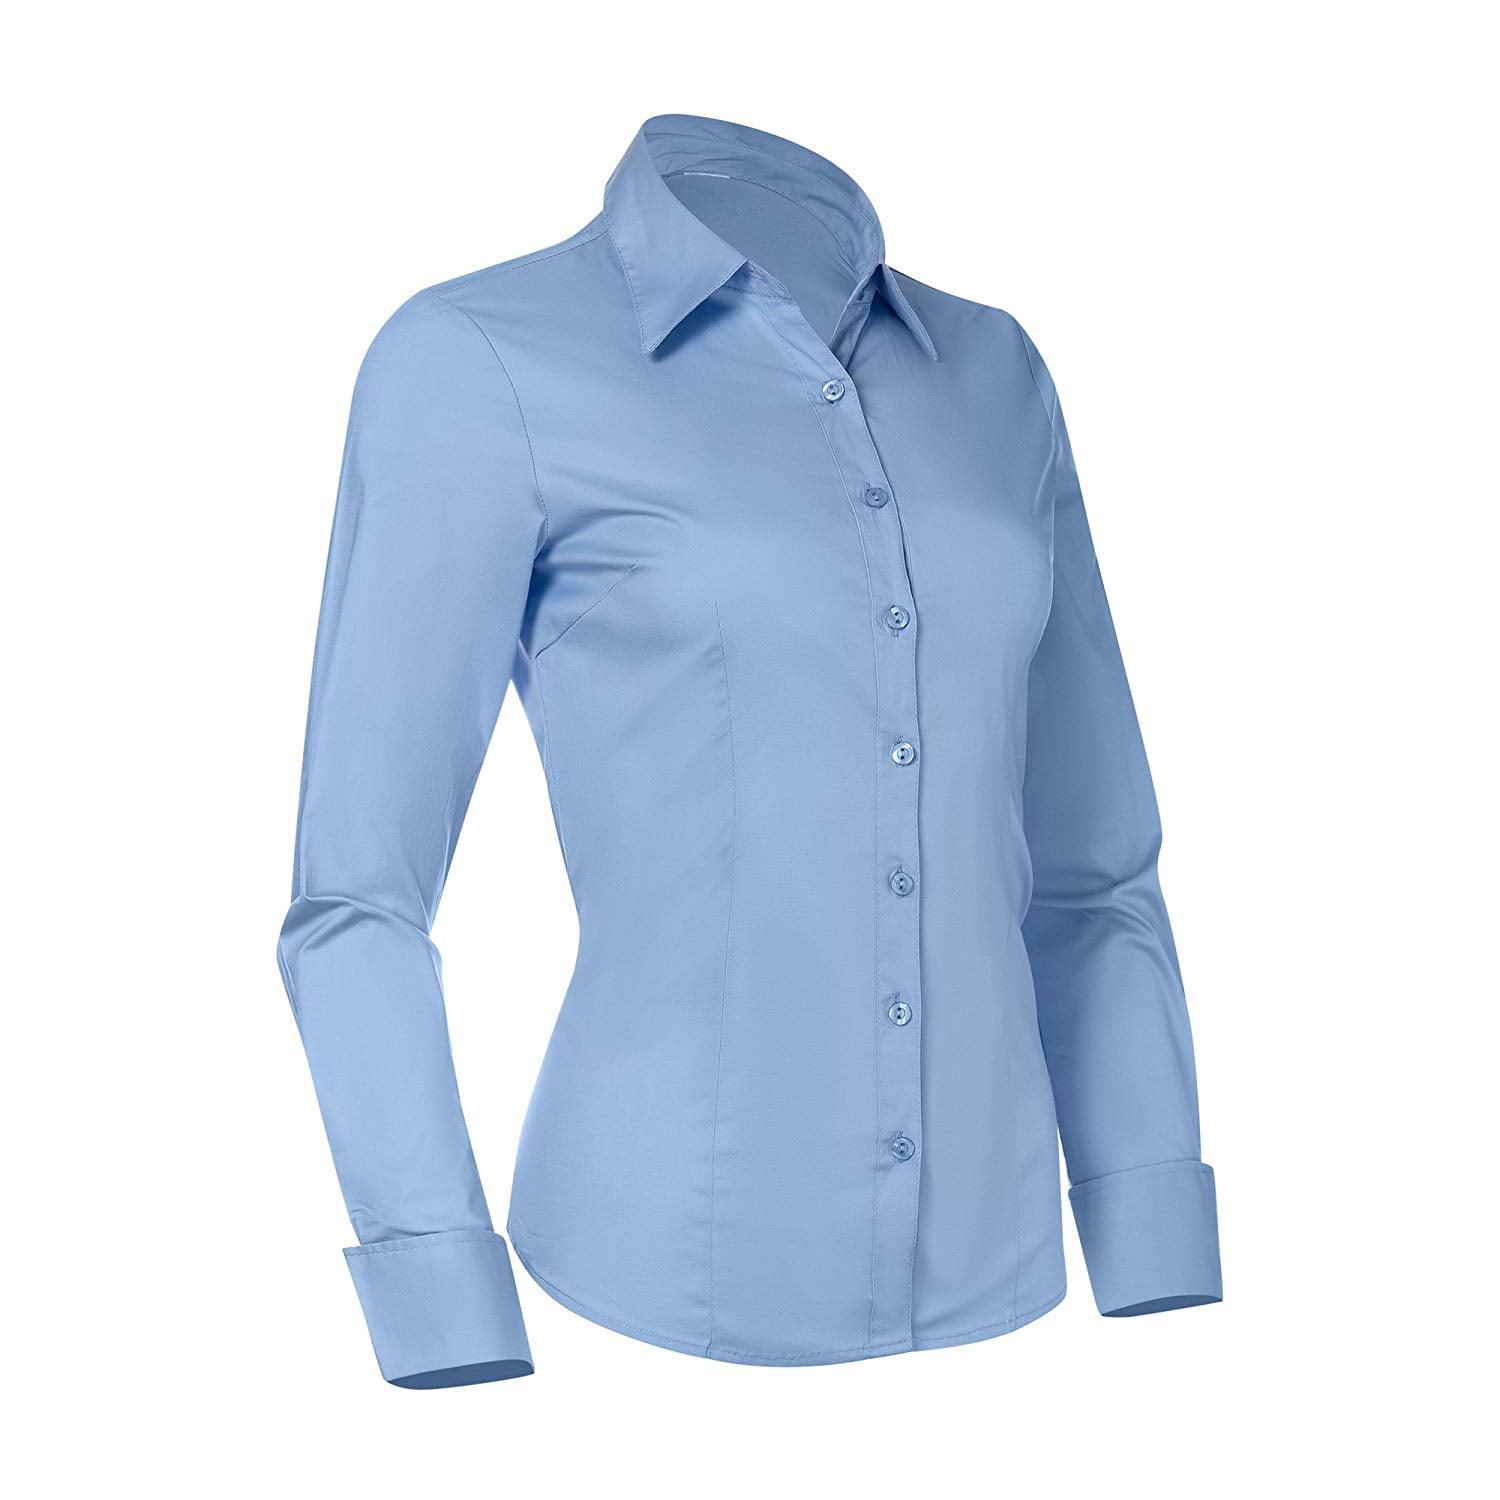 Pier 17 Button Down Shirts for Women, Fitted Long Sleeve Tailored Shirt  Blouse (Medium, Blue) 